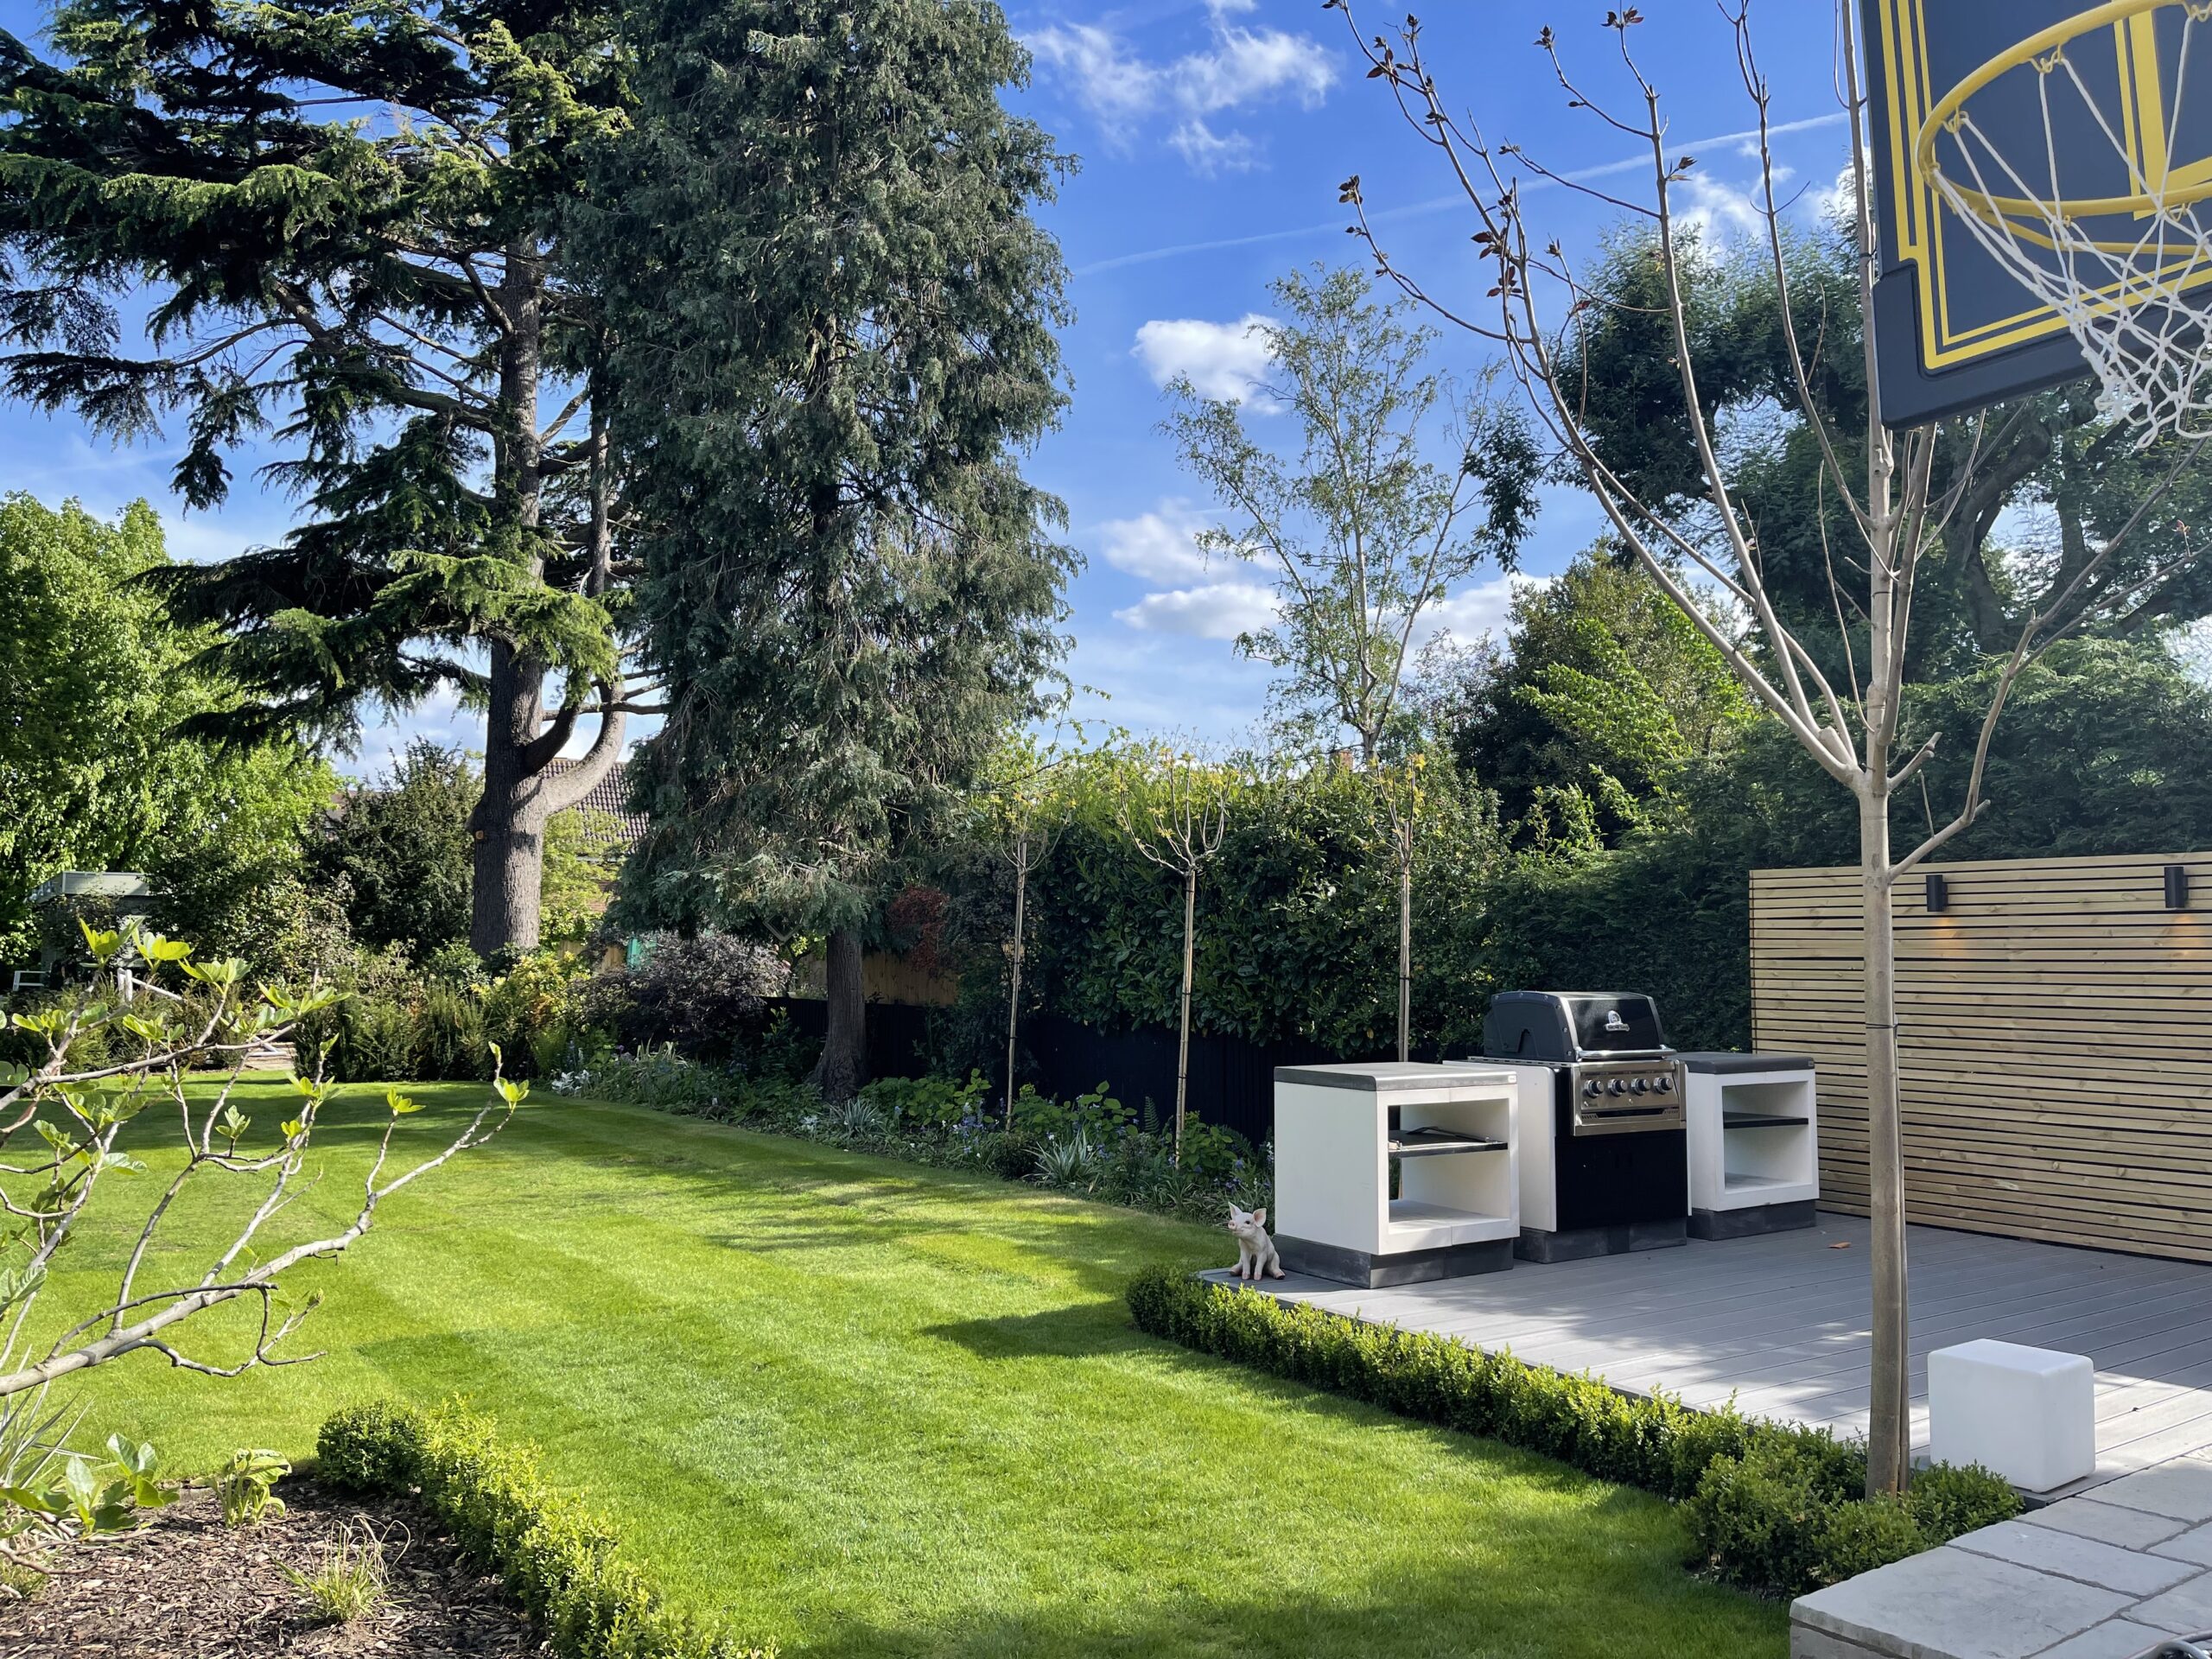 A well-maintained garden lawn with a grey wooden decking featuring an outdoor grill and cooking area designed by Willow Alexander